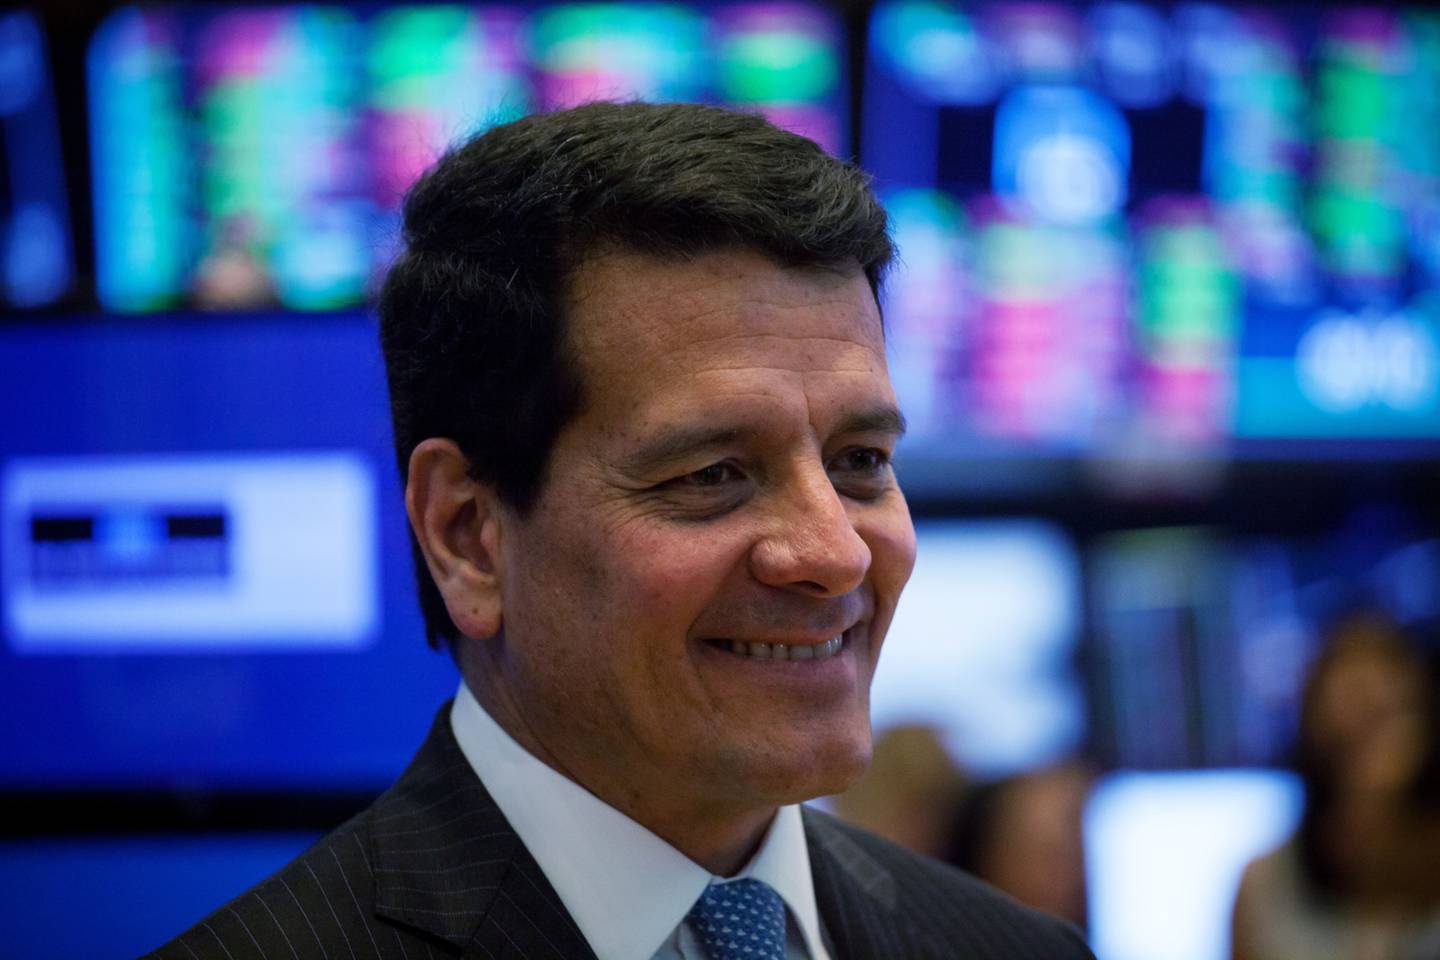 Felipe Bayon, chief executive officer of Ecopetrol SA, smiles on the floor of the New York Stock Exchange (NYSE) in New York, U.S., on Friday, Aug. 24, 2018. U.S. stocks rose, while the dollar deepened losses and Treasuries turned higher after the Federal Reserve chair signaled the central bank has no intention of accelerating the pace of rate hikes. Photographer: Michael Nagle/Bloomberg